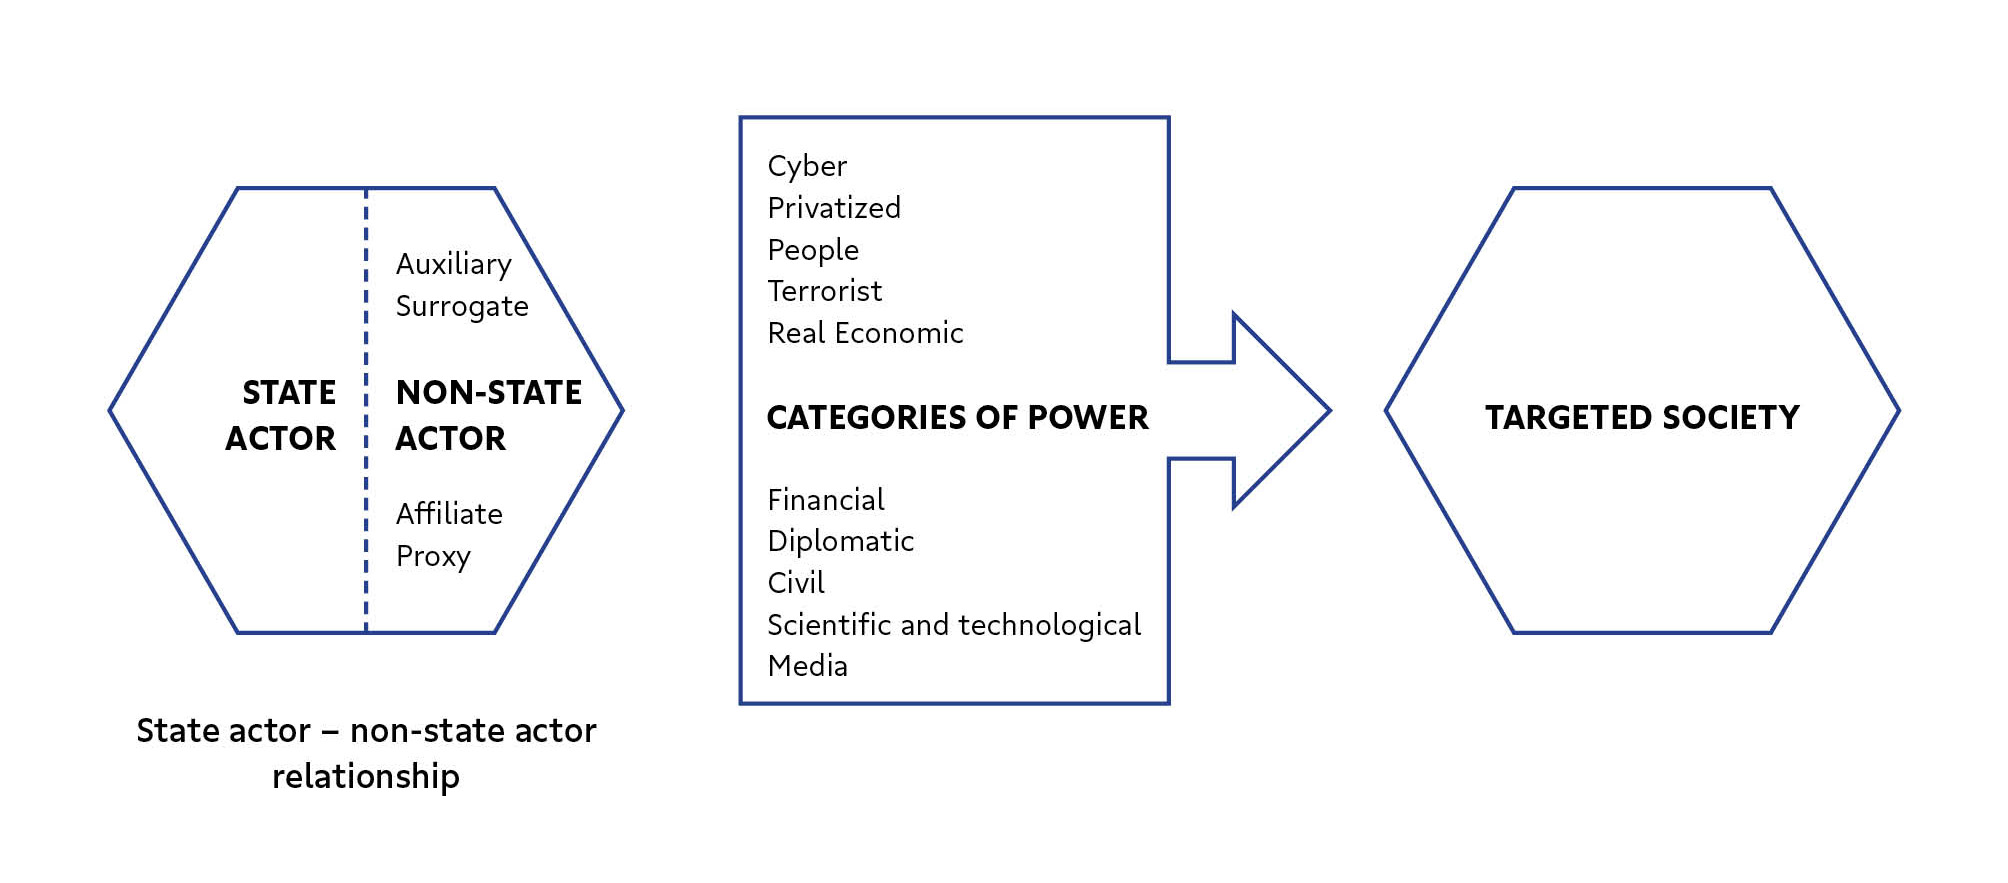 Hybrid threat activities through non-state actor clients depicted according to the relationship between the state and non-state actor (auxiliary, surrogate, affiliate or proxy) and the categories of power that the non-state actor may use against the target society (cyber, privatized, people, terrorist, real economic, financial, diplomatic, civil, scientific and technological, or media power).